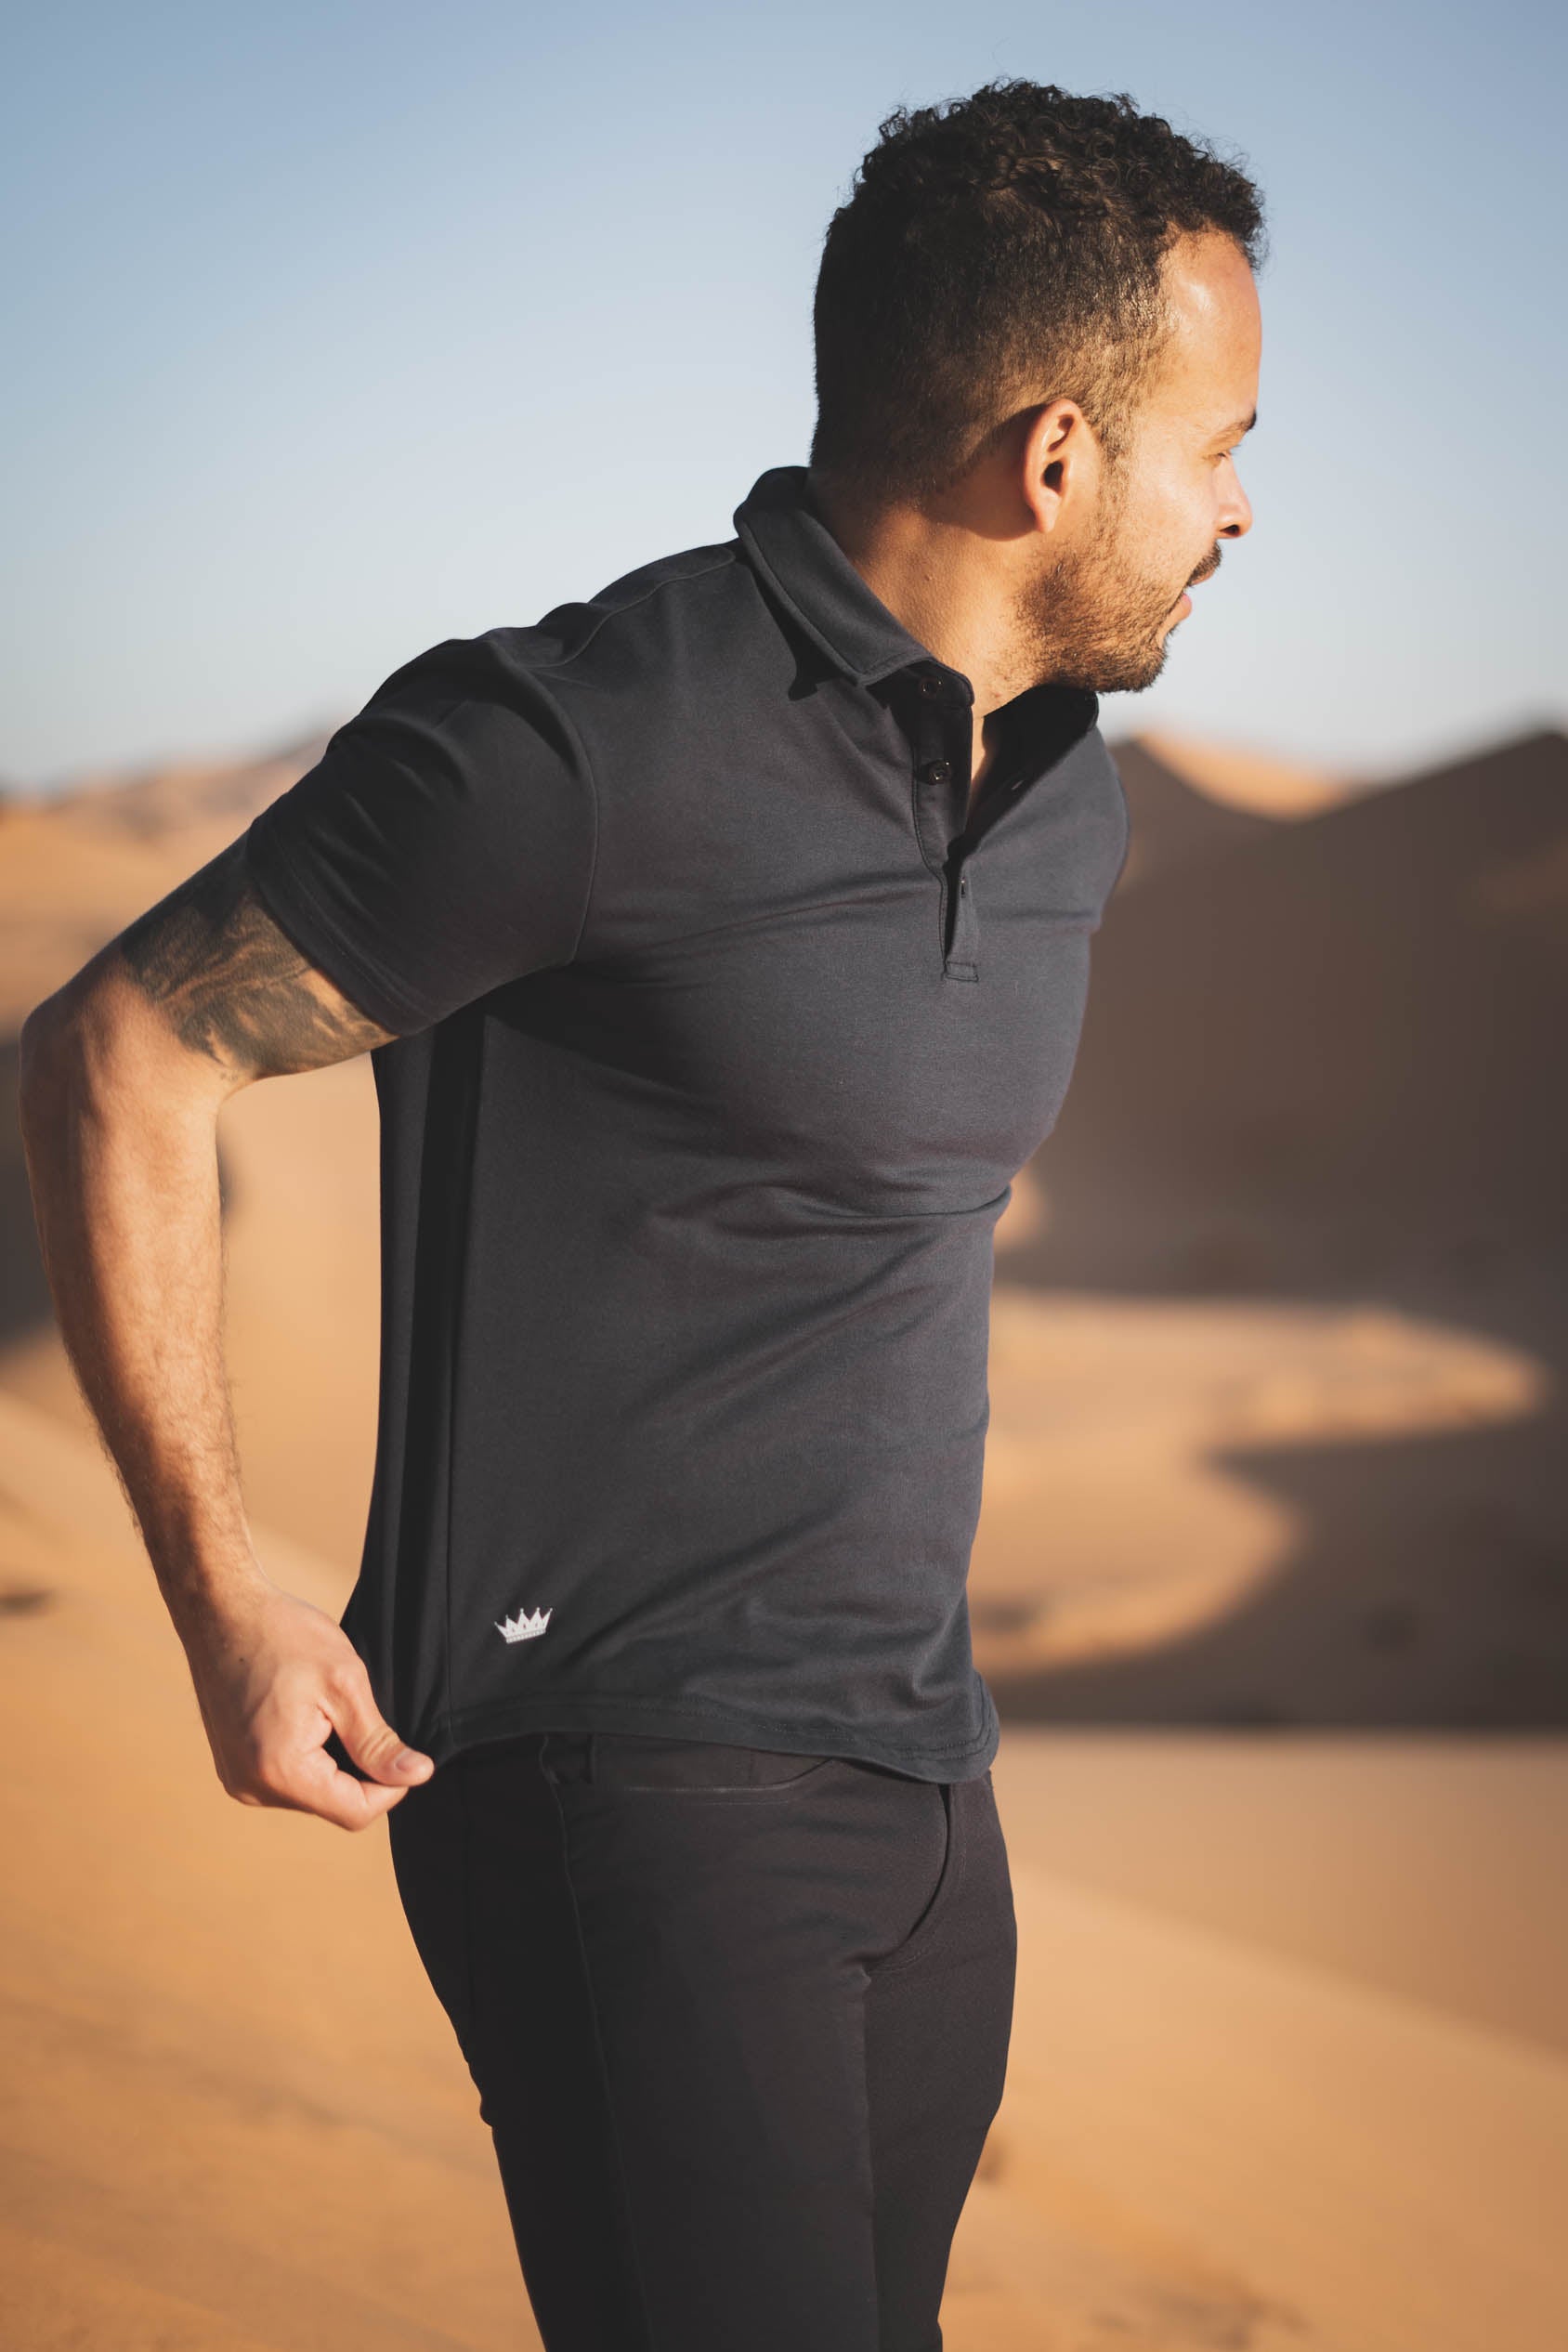 Athletic Blend Polo Navy